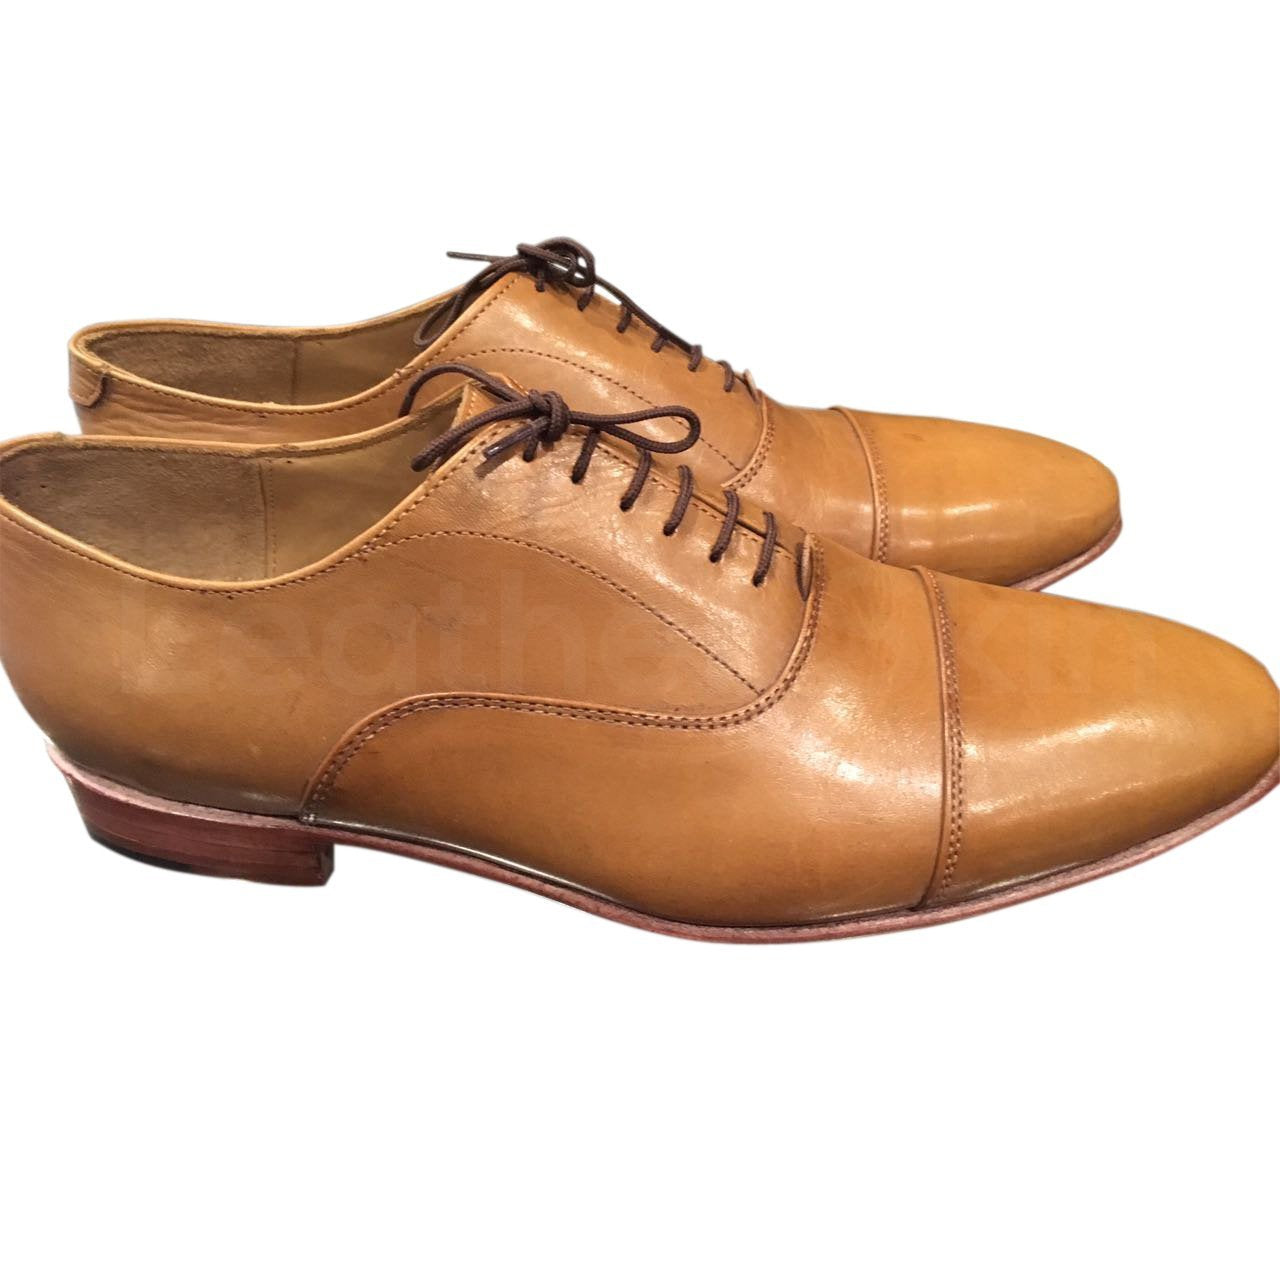 Men's Black Formal Shoes - Top Genuine Leather Shoes in SA